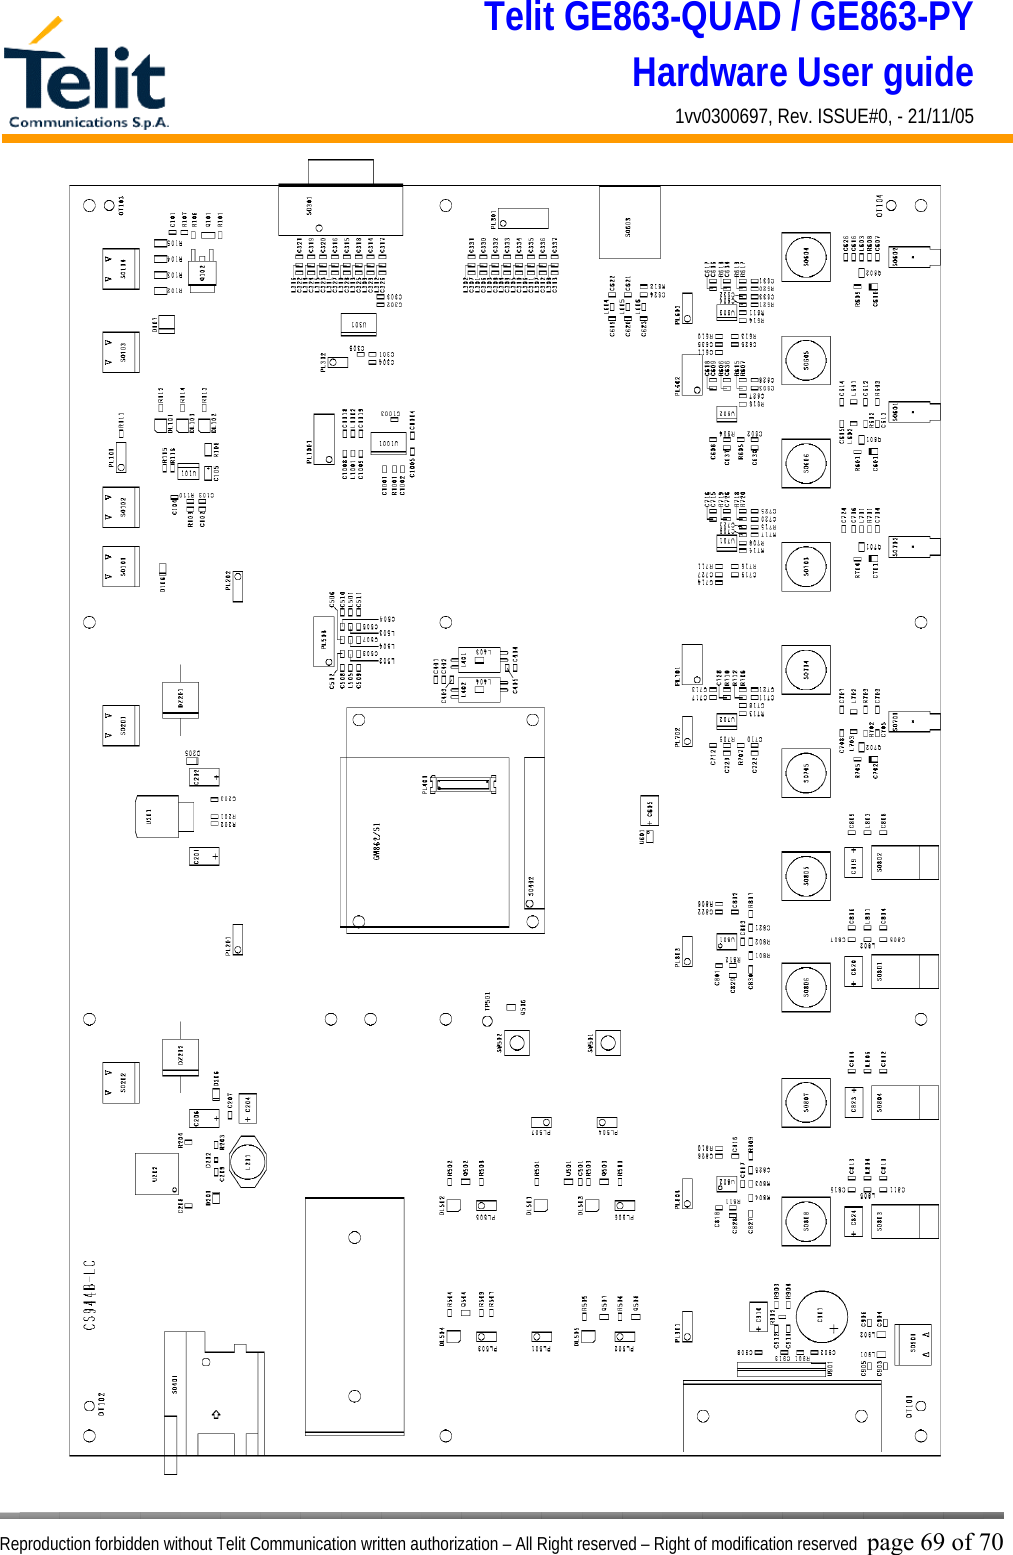 Telit GE863-QUAD / GE863-PY Hardware User guide 1vv0300697, Rev. ISSUE#0, - 21/11/05    Reproduction forbidden without Telit Communication written authorization – All Right reserved – Right of modification reserved page 69 of 70 